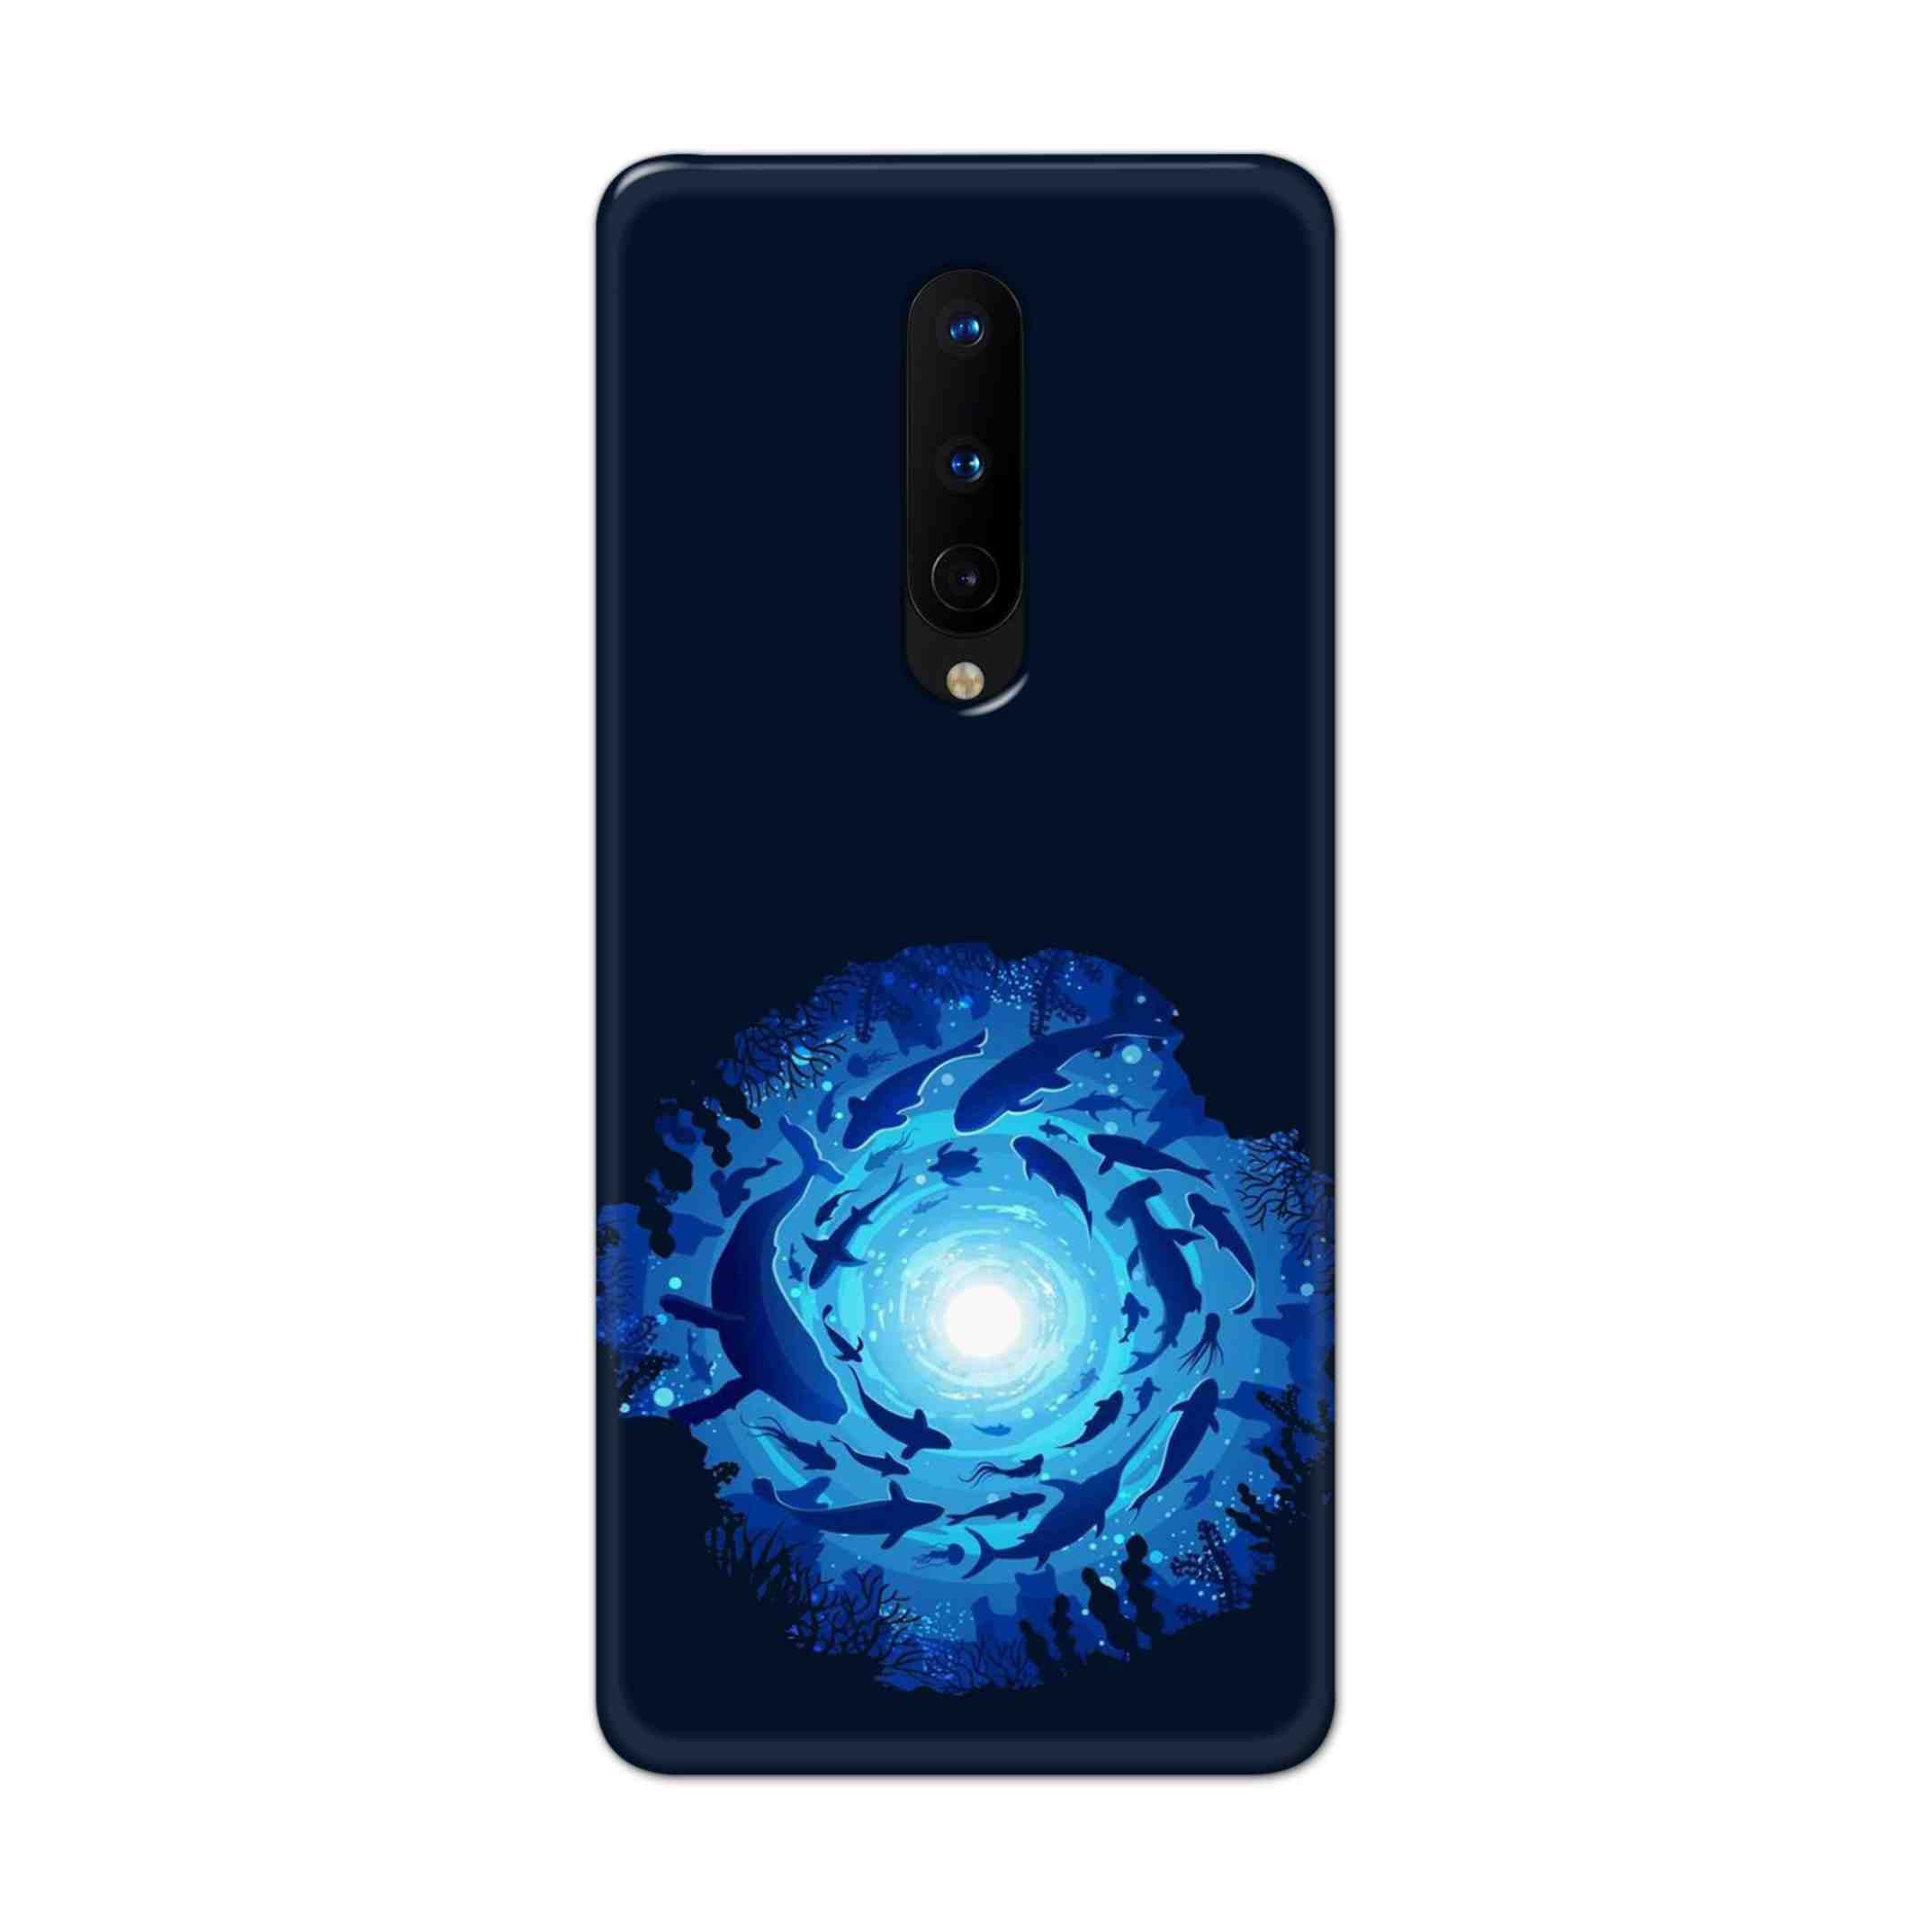 Buy Blue Whale Hard Back Mobile Phone Case Cover For OnePlus 8 Online